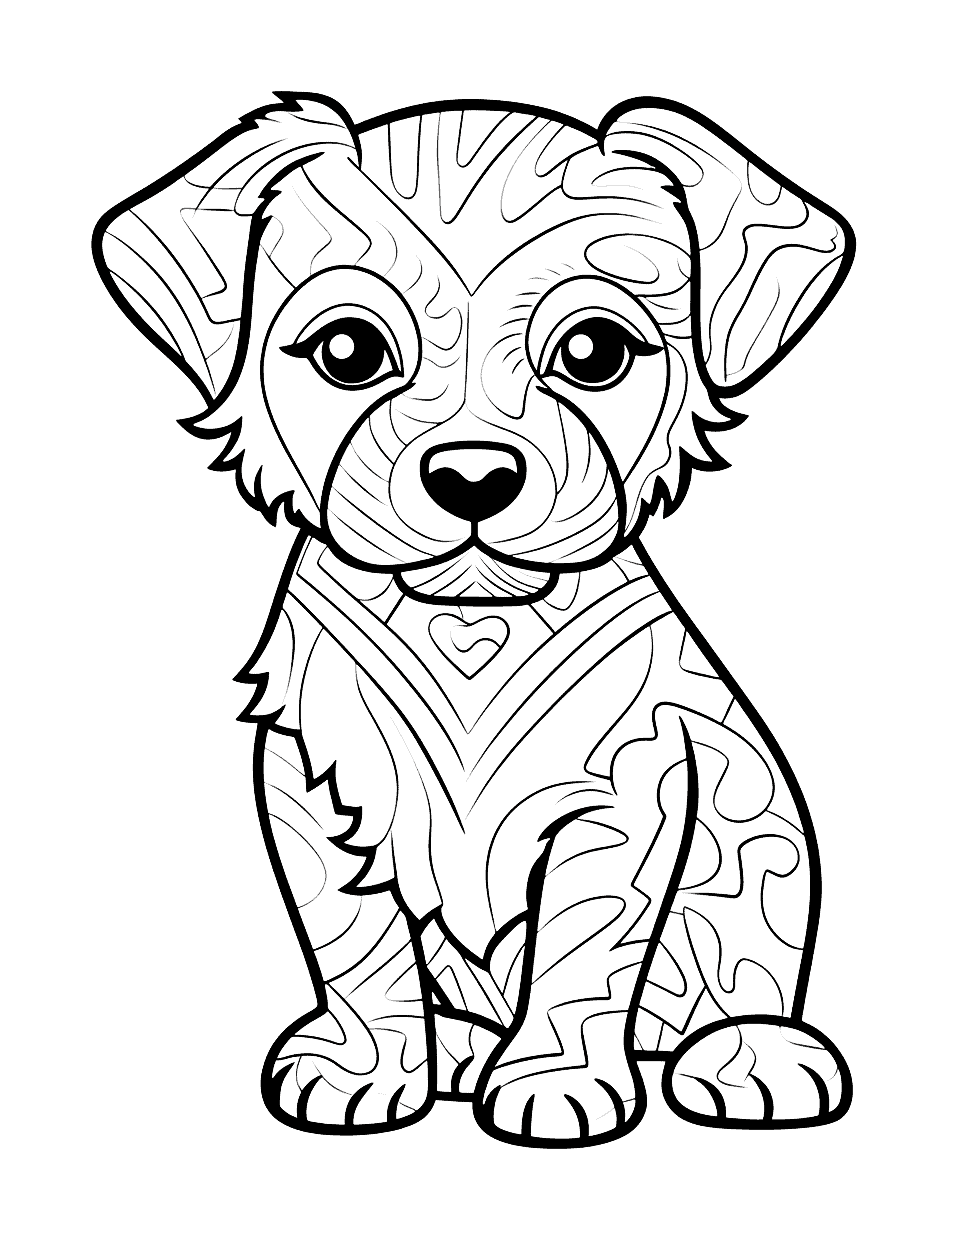 Artistic Expression Abstract Puppy Design Coloring Page - An abstract coloring sheet of a puppy using geometric shapes and patterns.